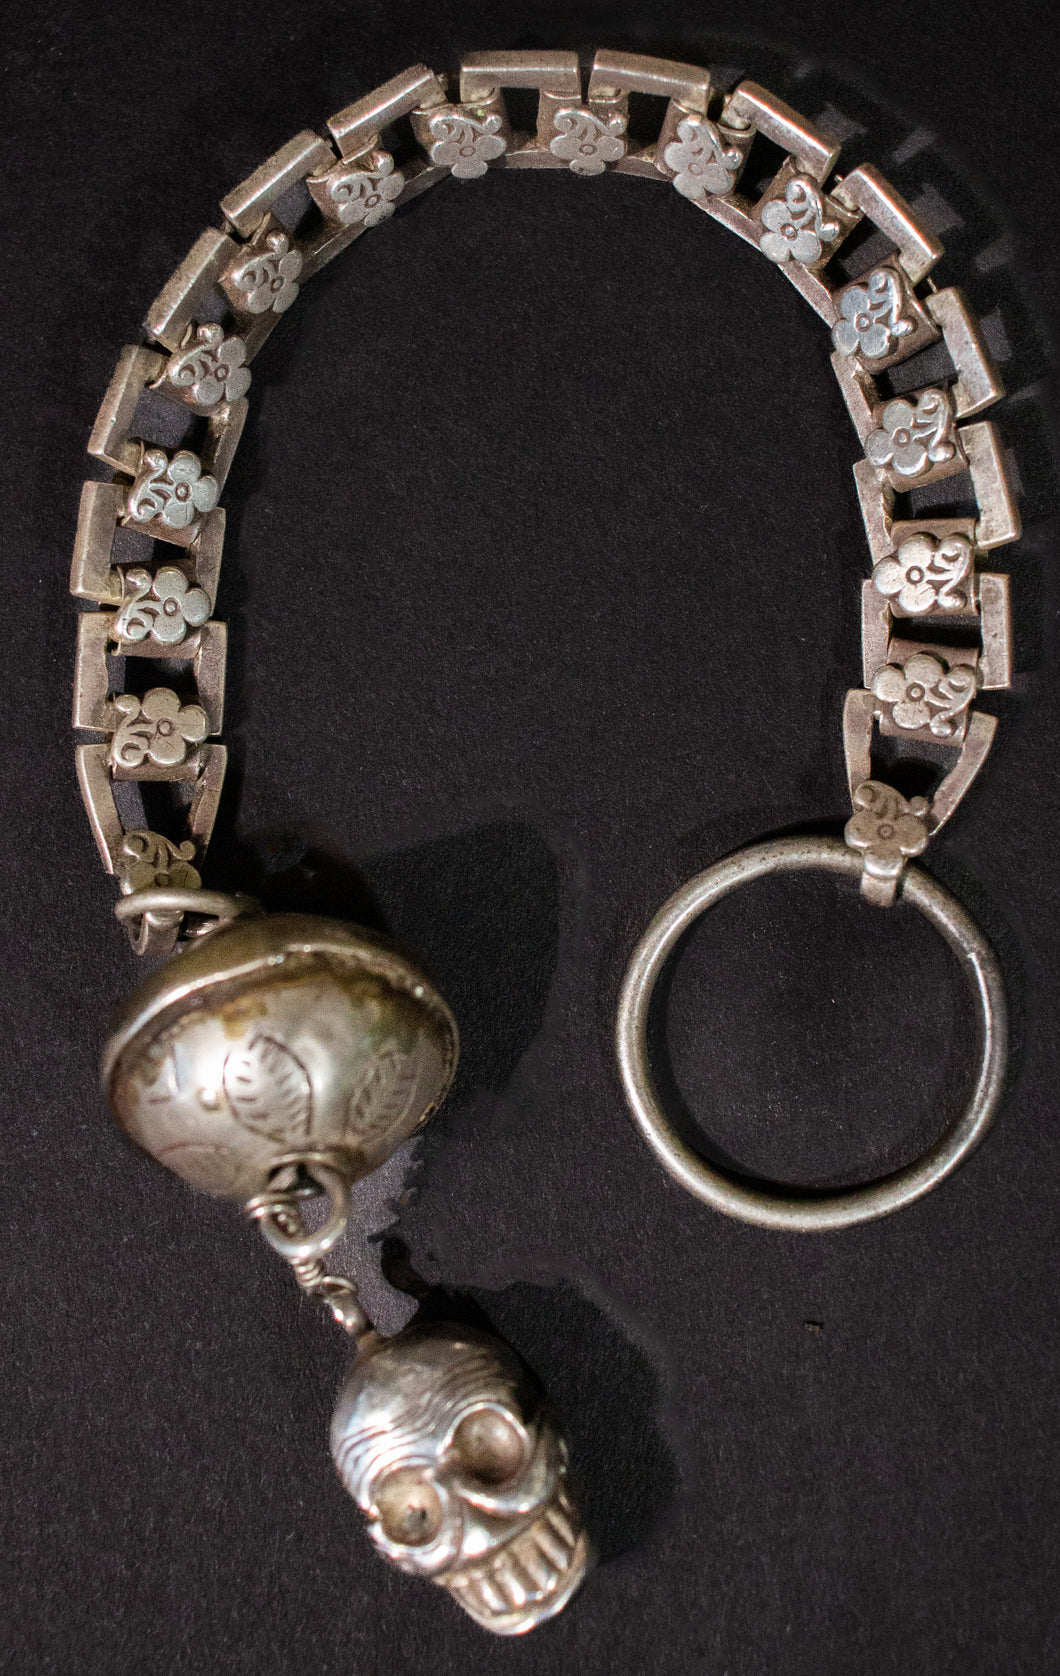 Silver Key Ring with Antique Indian Chain and Skull head